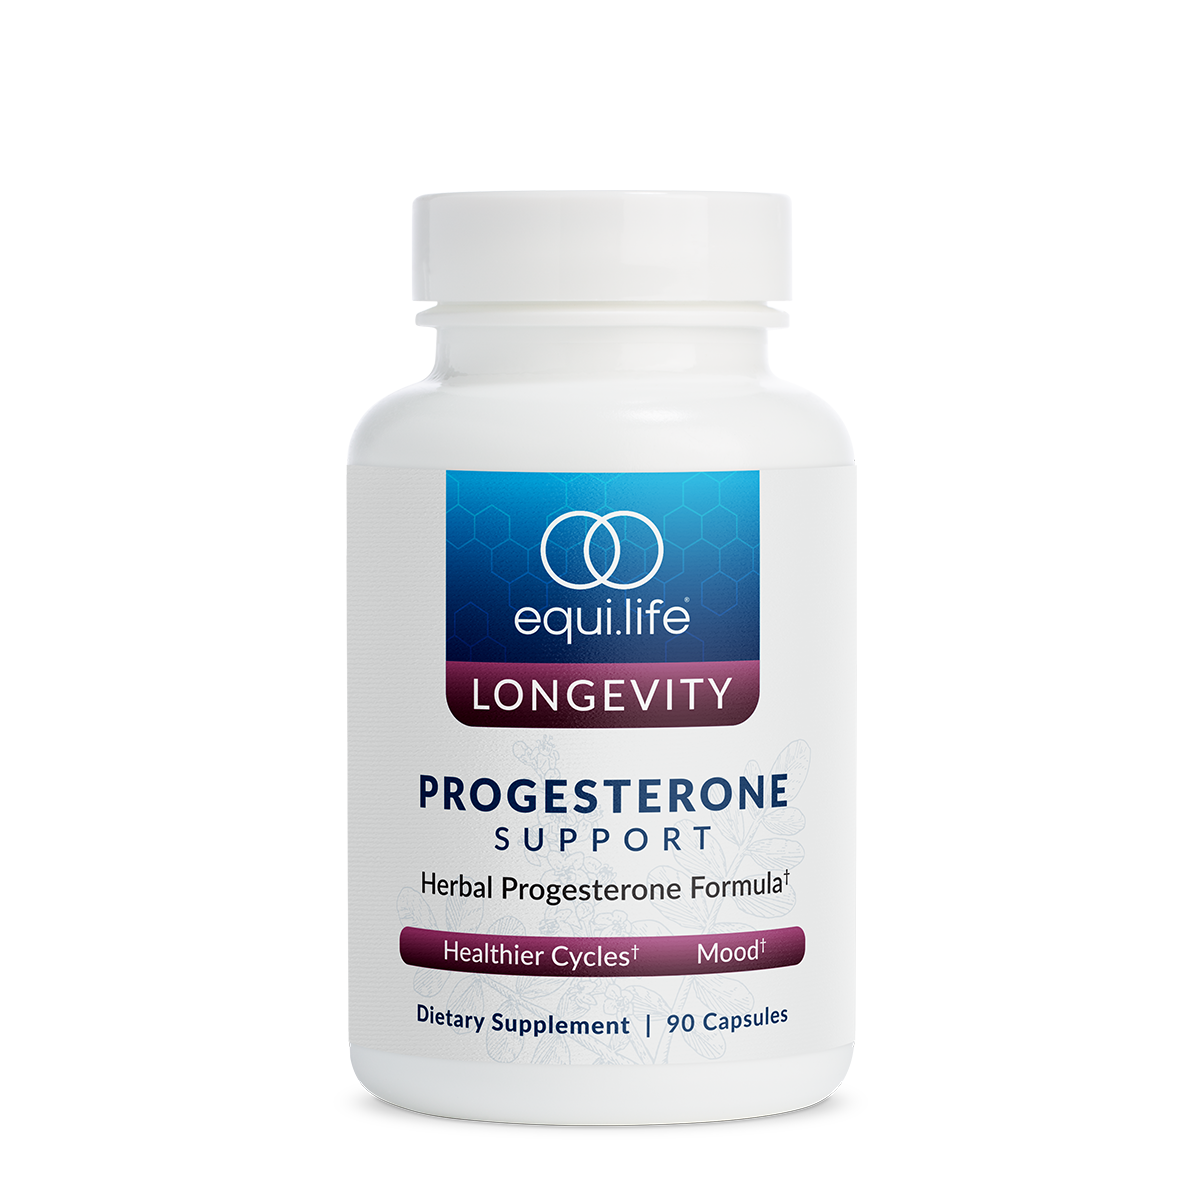 Progesterone Support